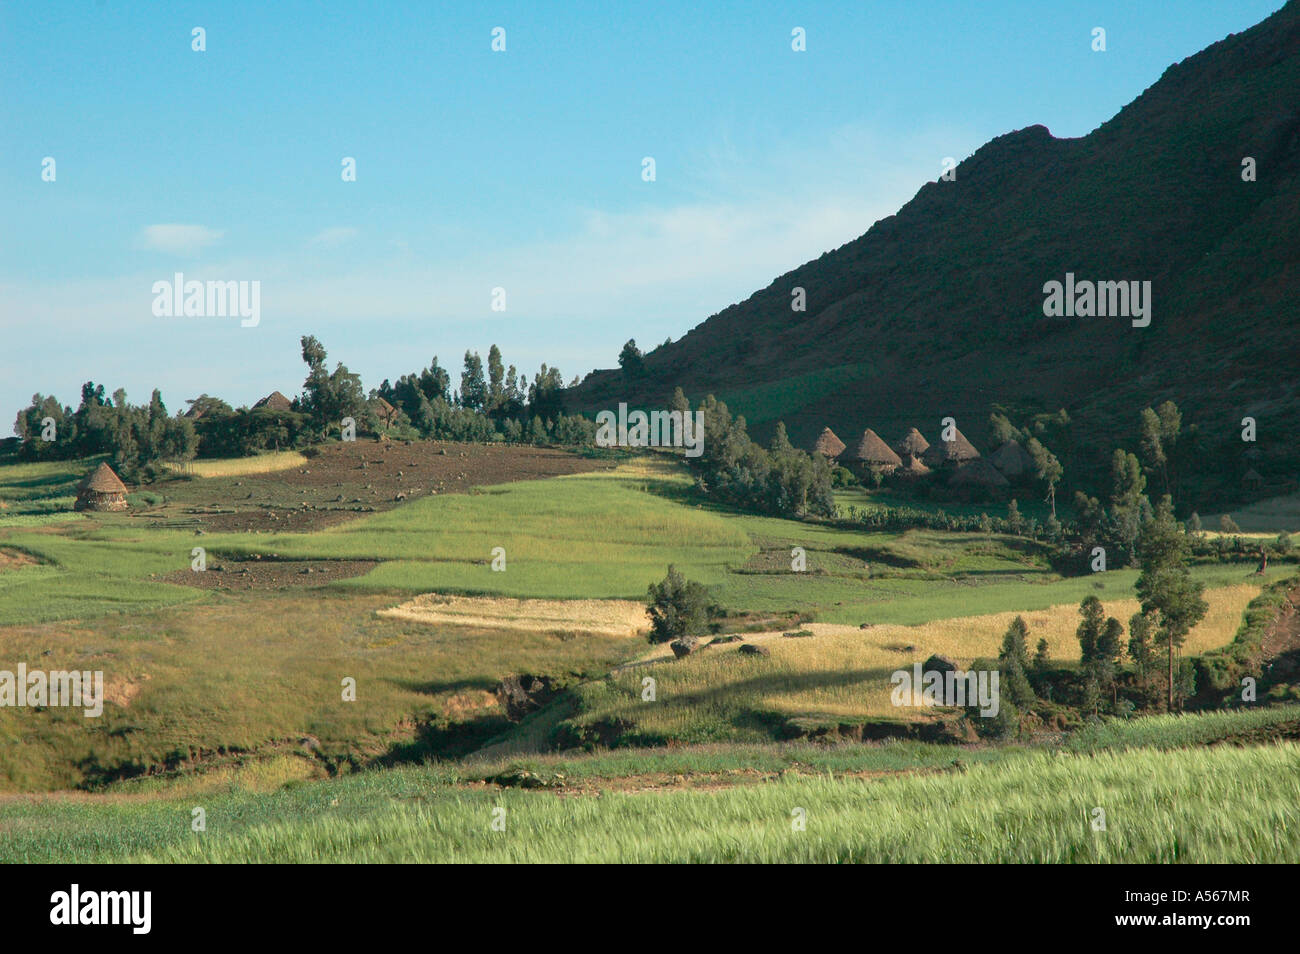 Painet iy7847 ethiopia landscapes northern shoa photo 2004 country developing nation less economically developed culture Stock Photo